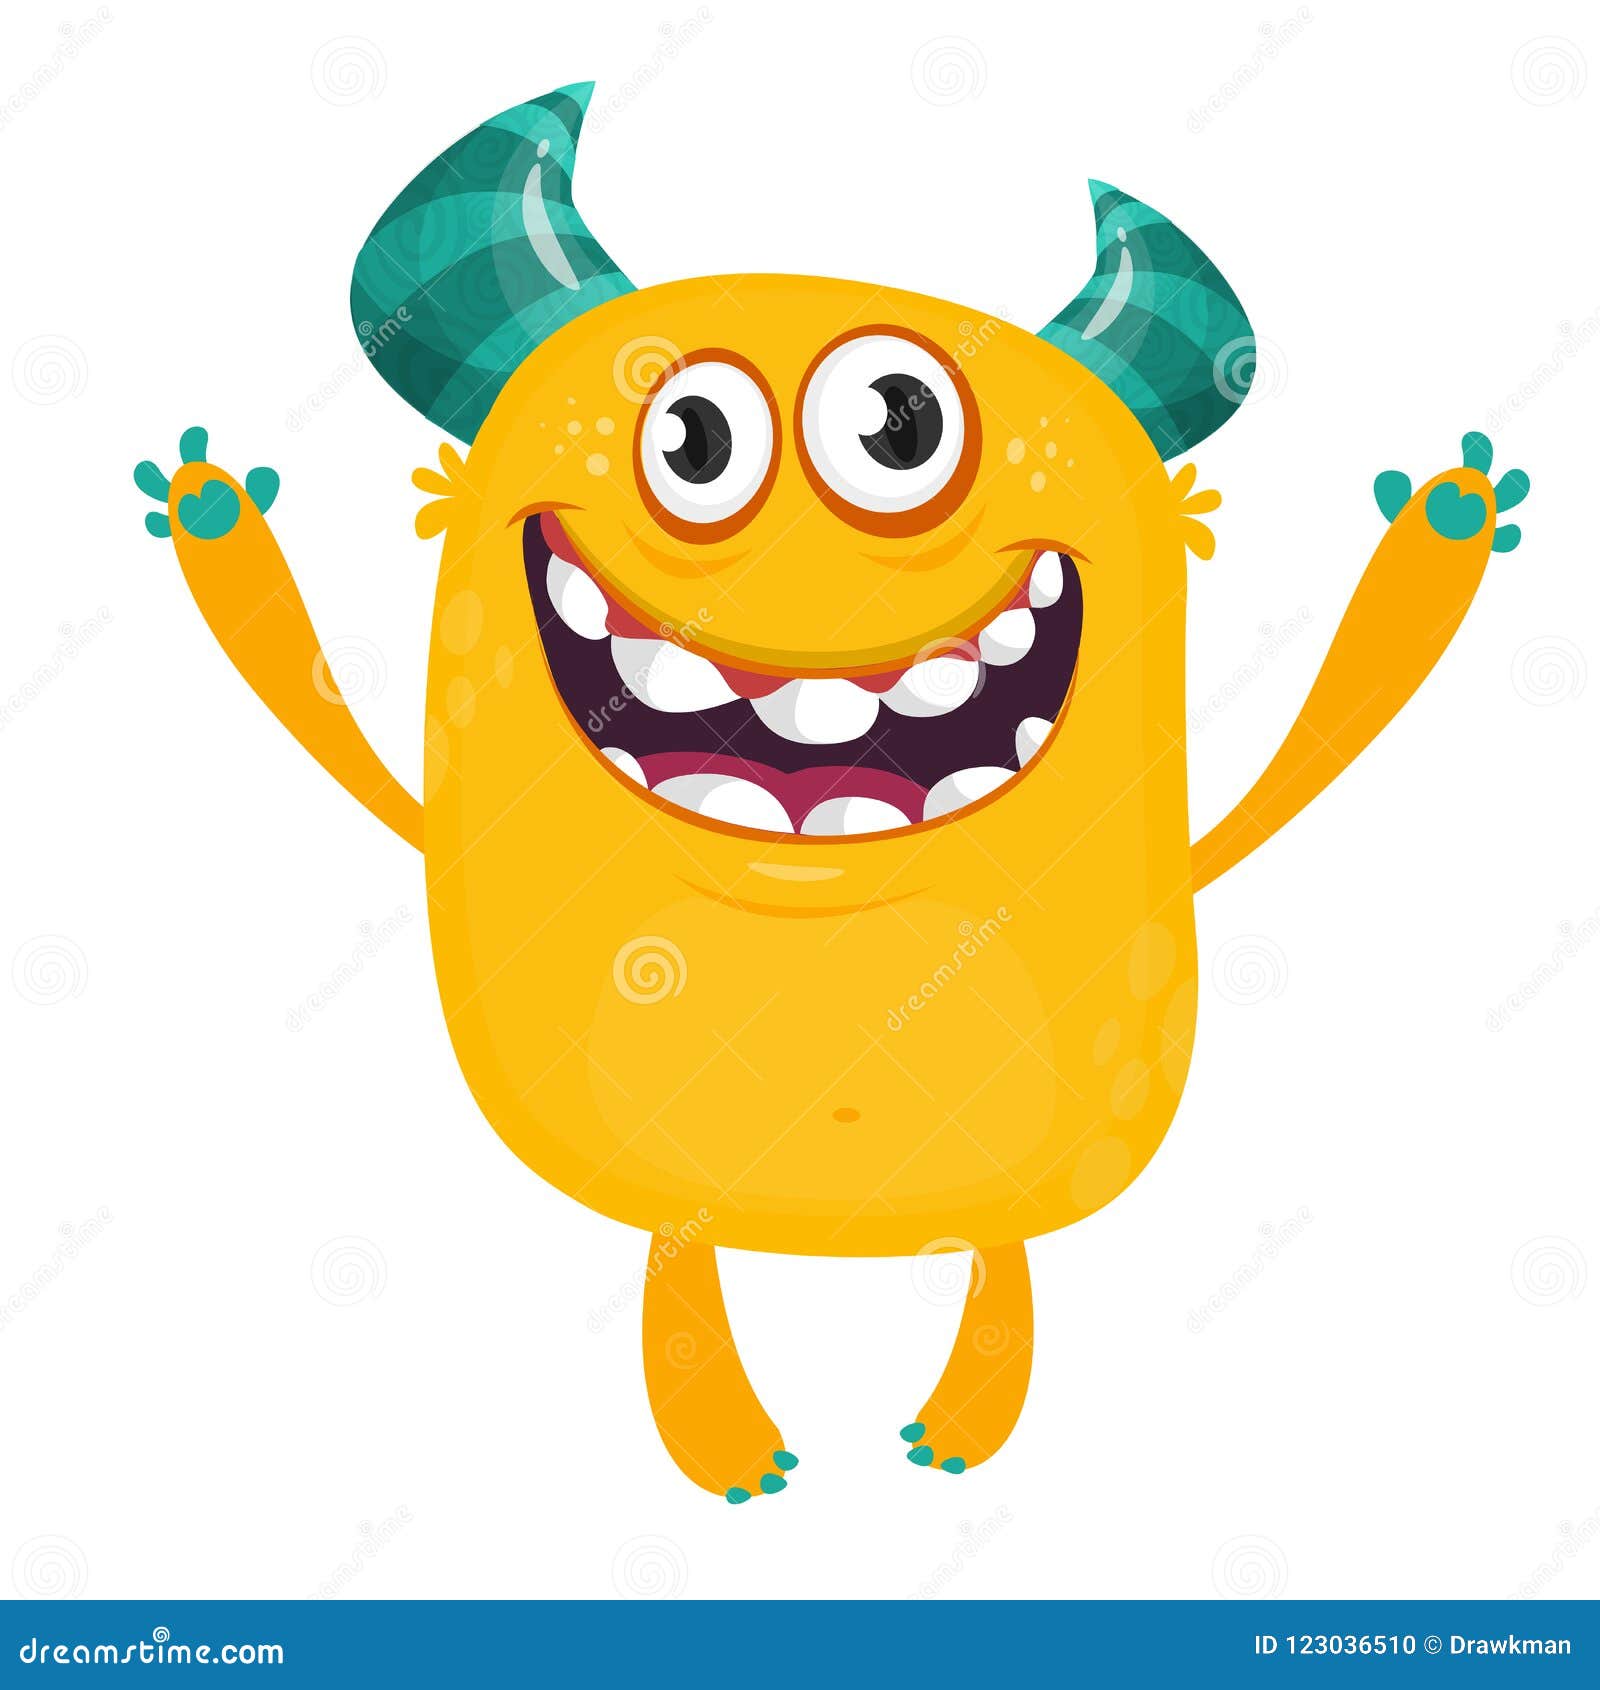 Happy Cartoon Orange Monster. Halloween Vector Illustration of Excited  Monster Stock Vector - Illustration of angry, excited: 123036510